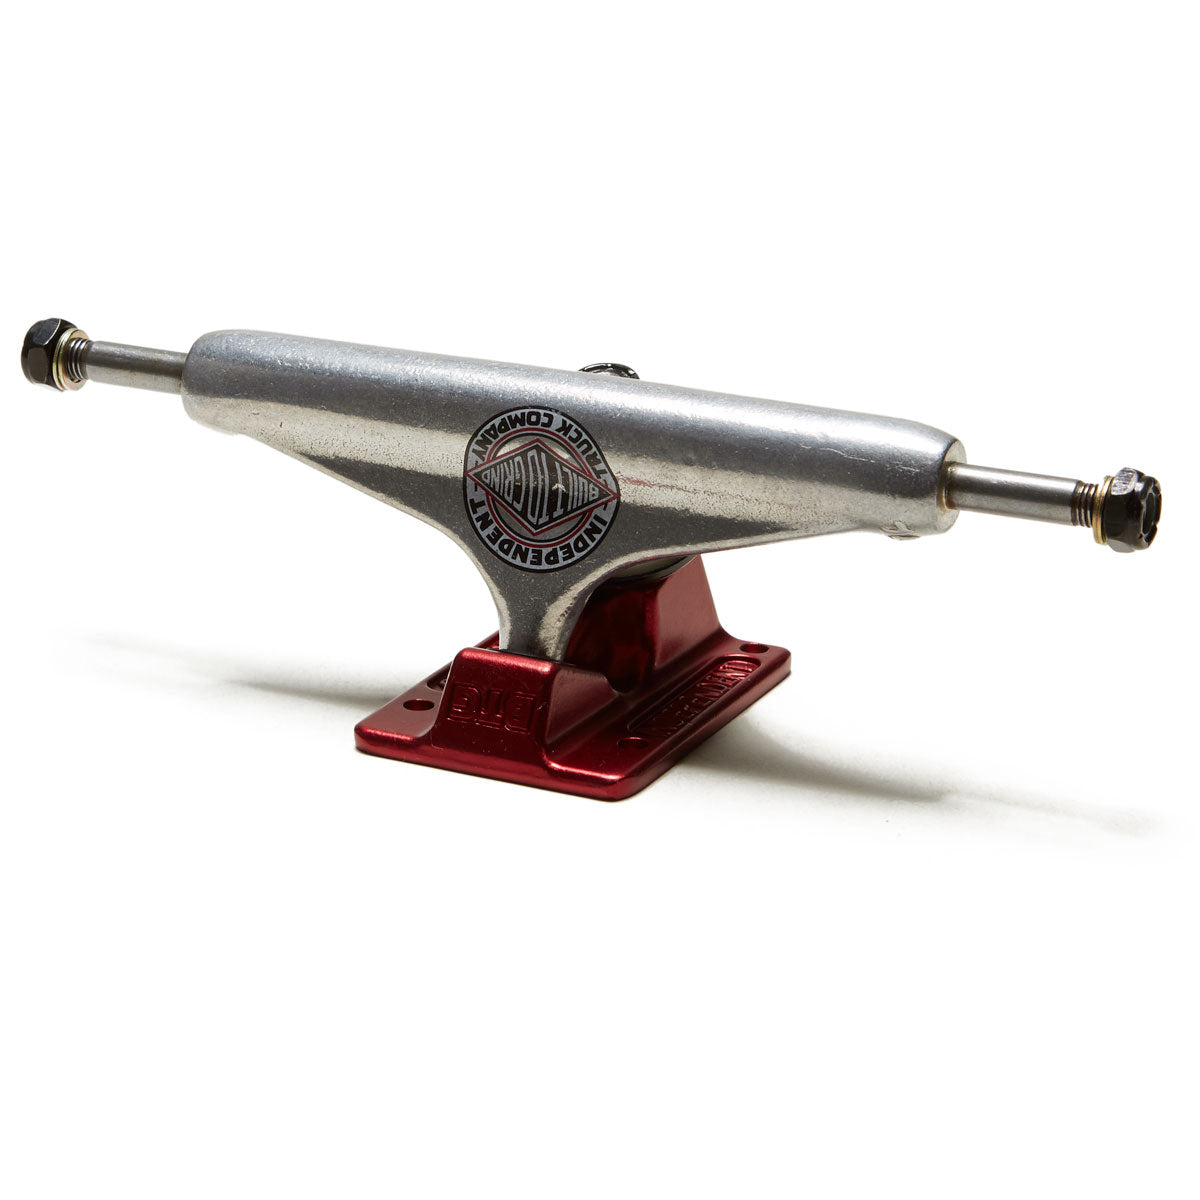 Independent Stage 11 Forged Hollow BTG Summit Standard Skateboard Trucks - Silver/Ano Red - 139mm image 1